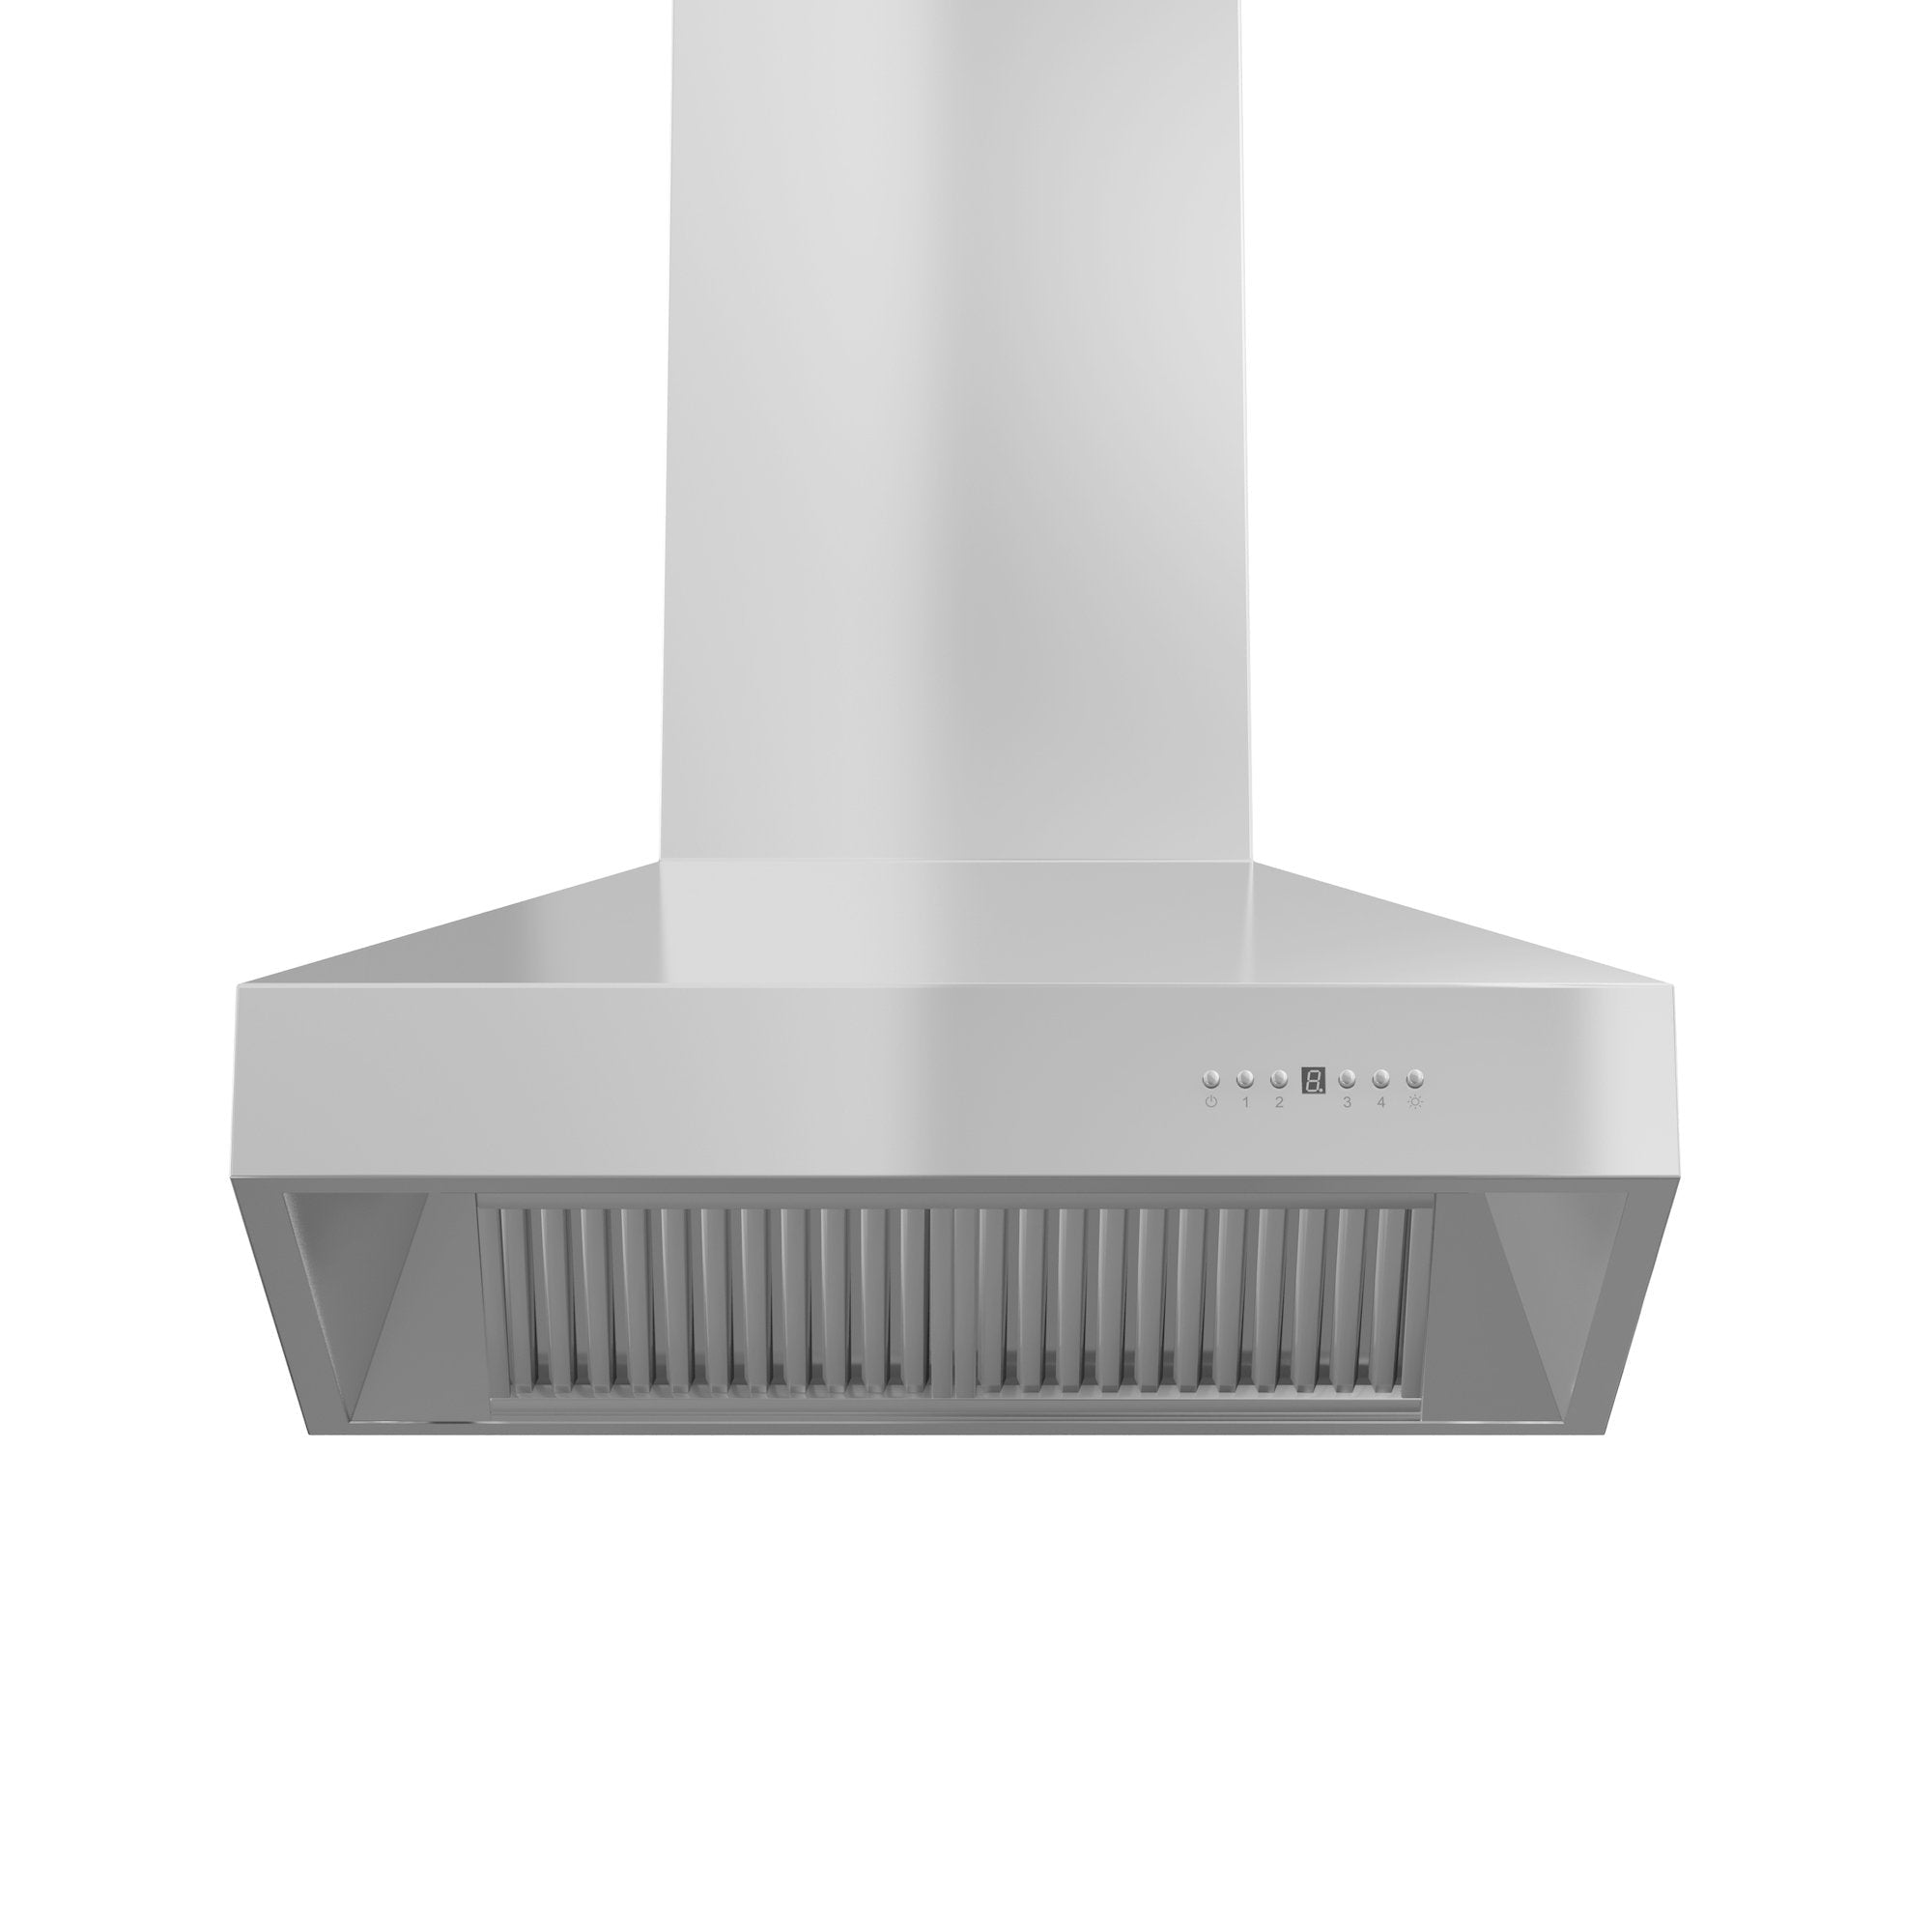 ZLINE Kitchen and Bath, ZLINE Outdoor Approved Wall Mount Range Hood in Stainless Steel (697-304), 697-304-30,